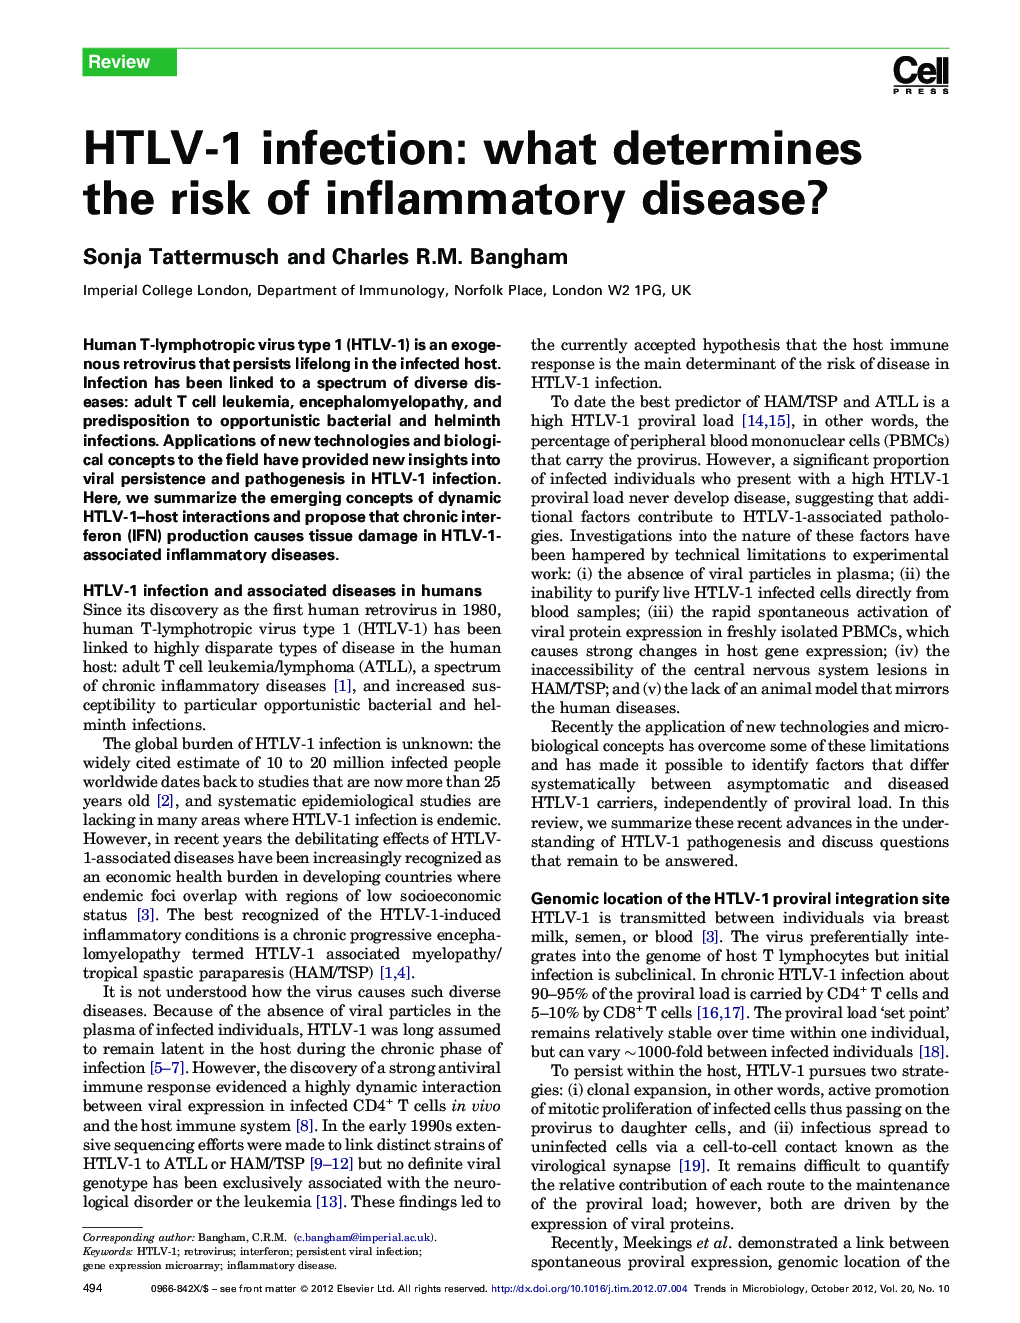 HTLV-1 infection: what determines the risk of inflammatory disease?